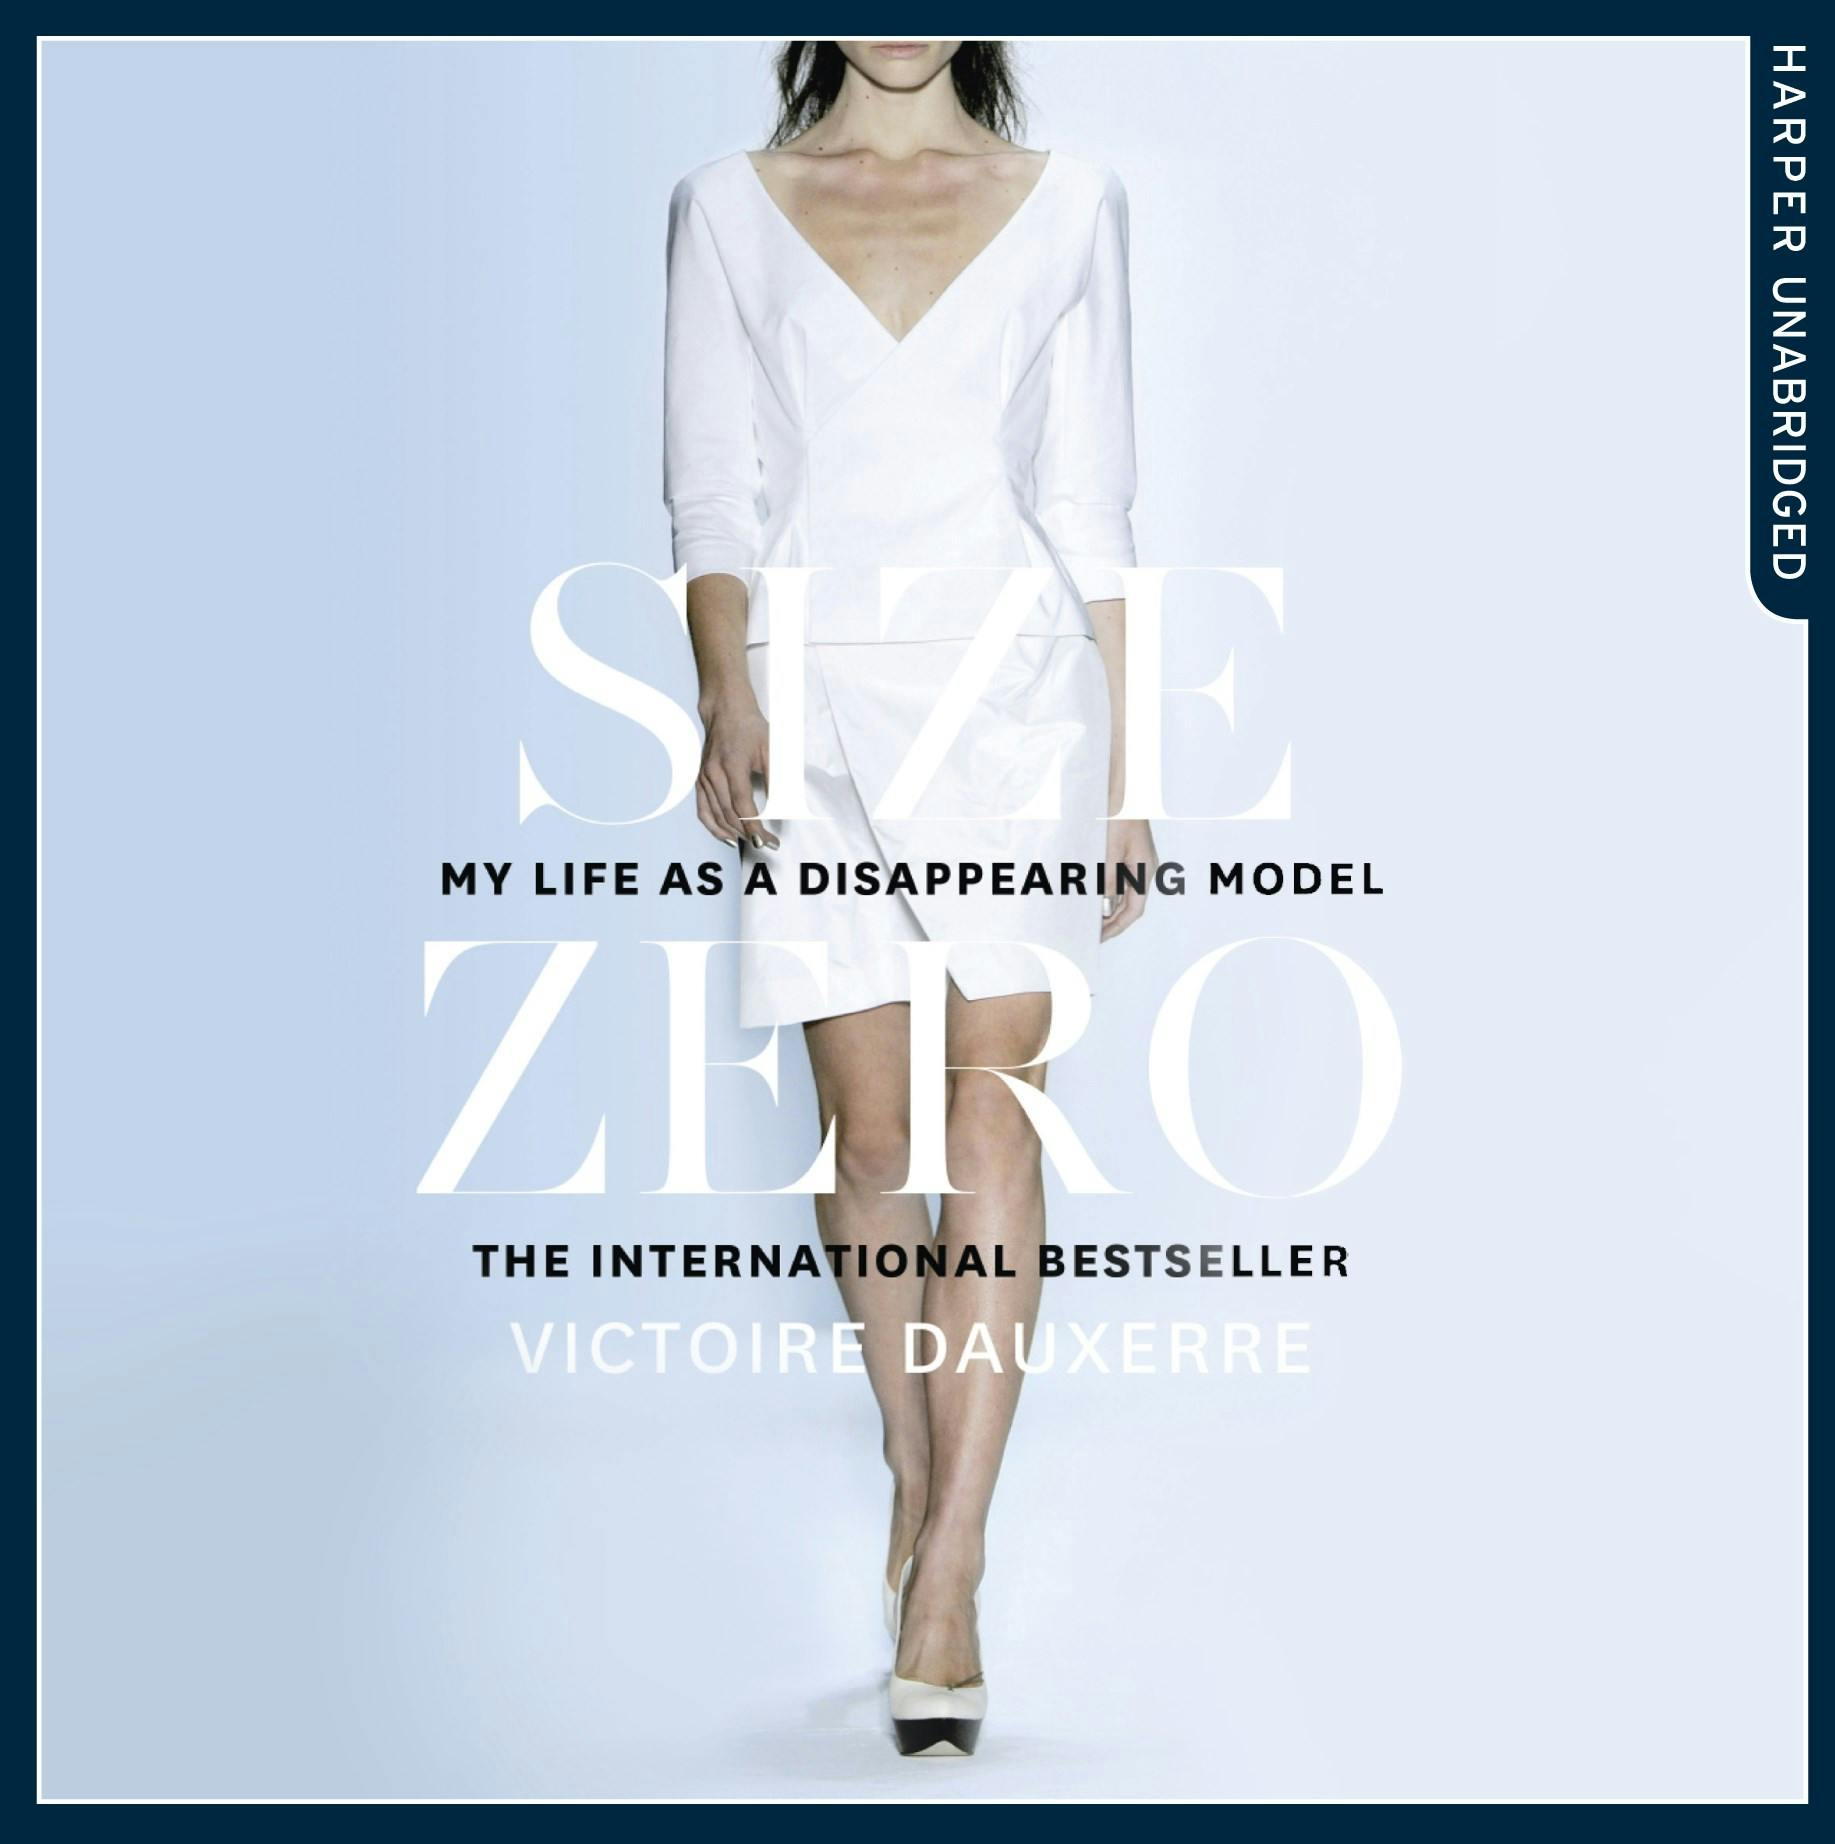 Size Zero: My Life as a Disappearing Model - Victoire Dauxerre